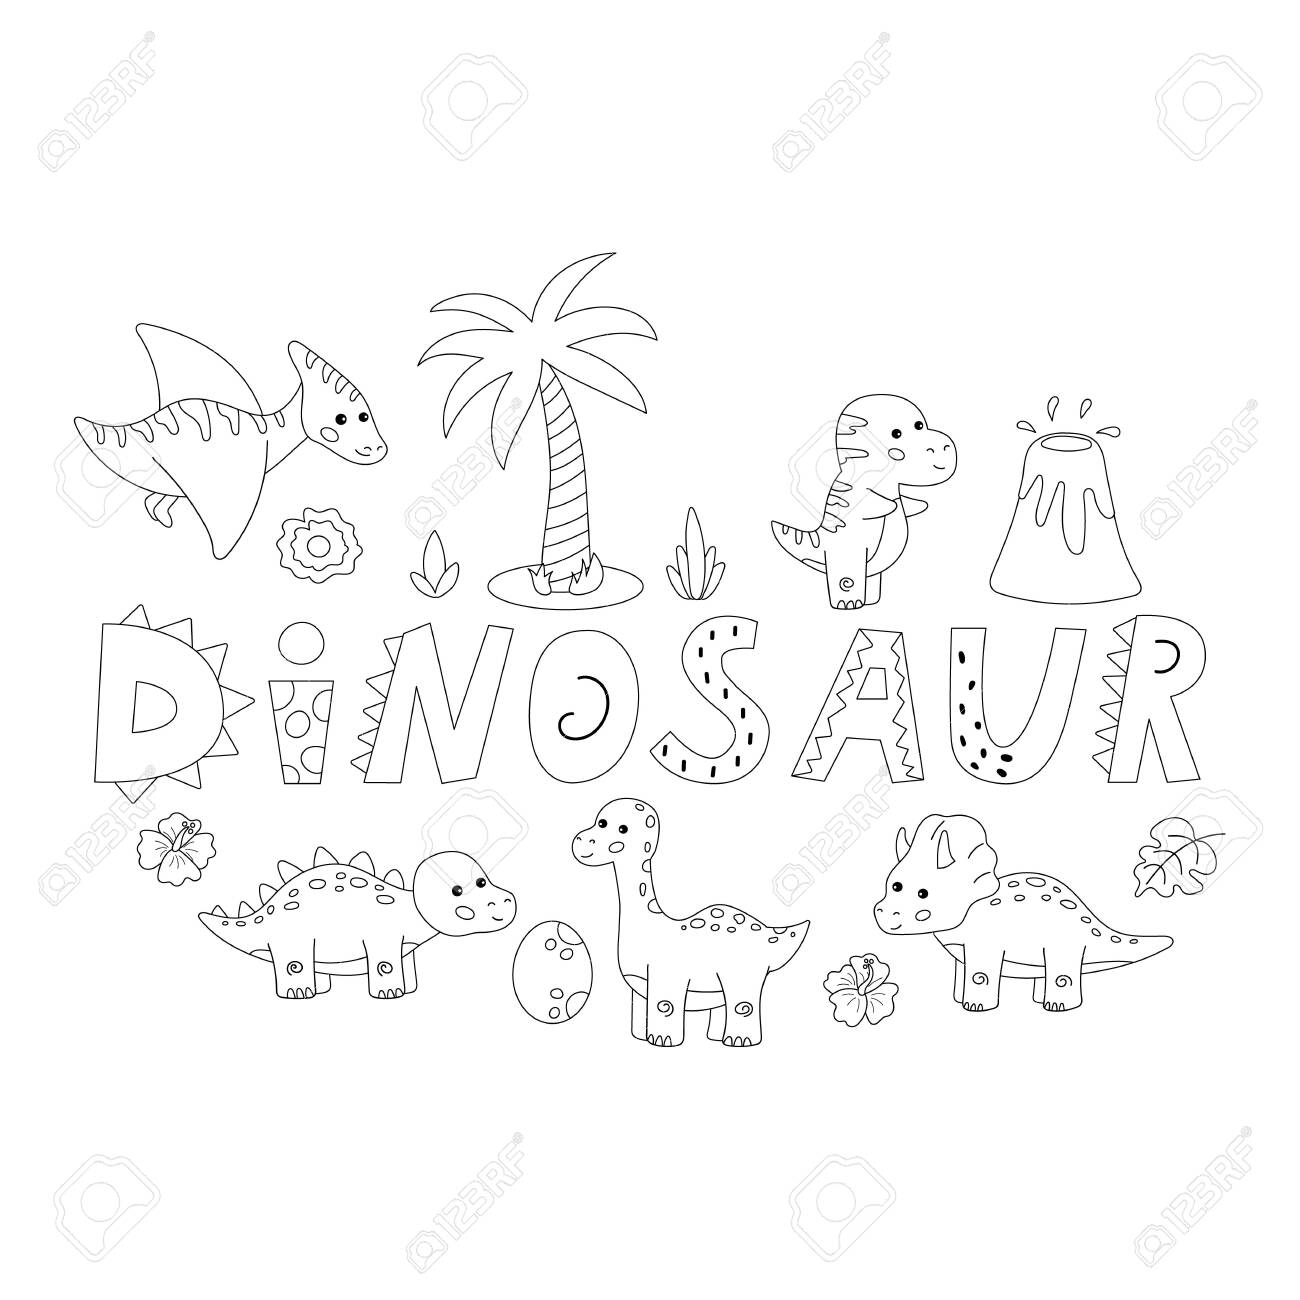 Cute cartoon kawaii dinosaurs coloring page educational game for preschool children black and white vector illustration royalty free svg cliparts vectors and stock illustration image